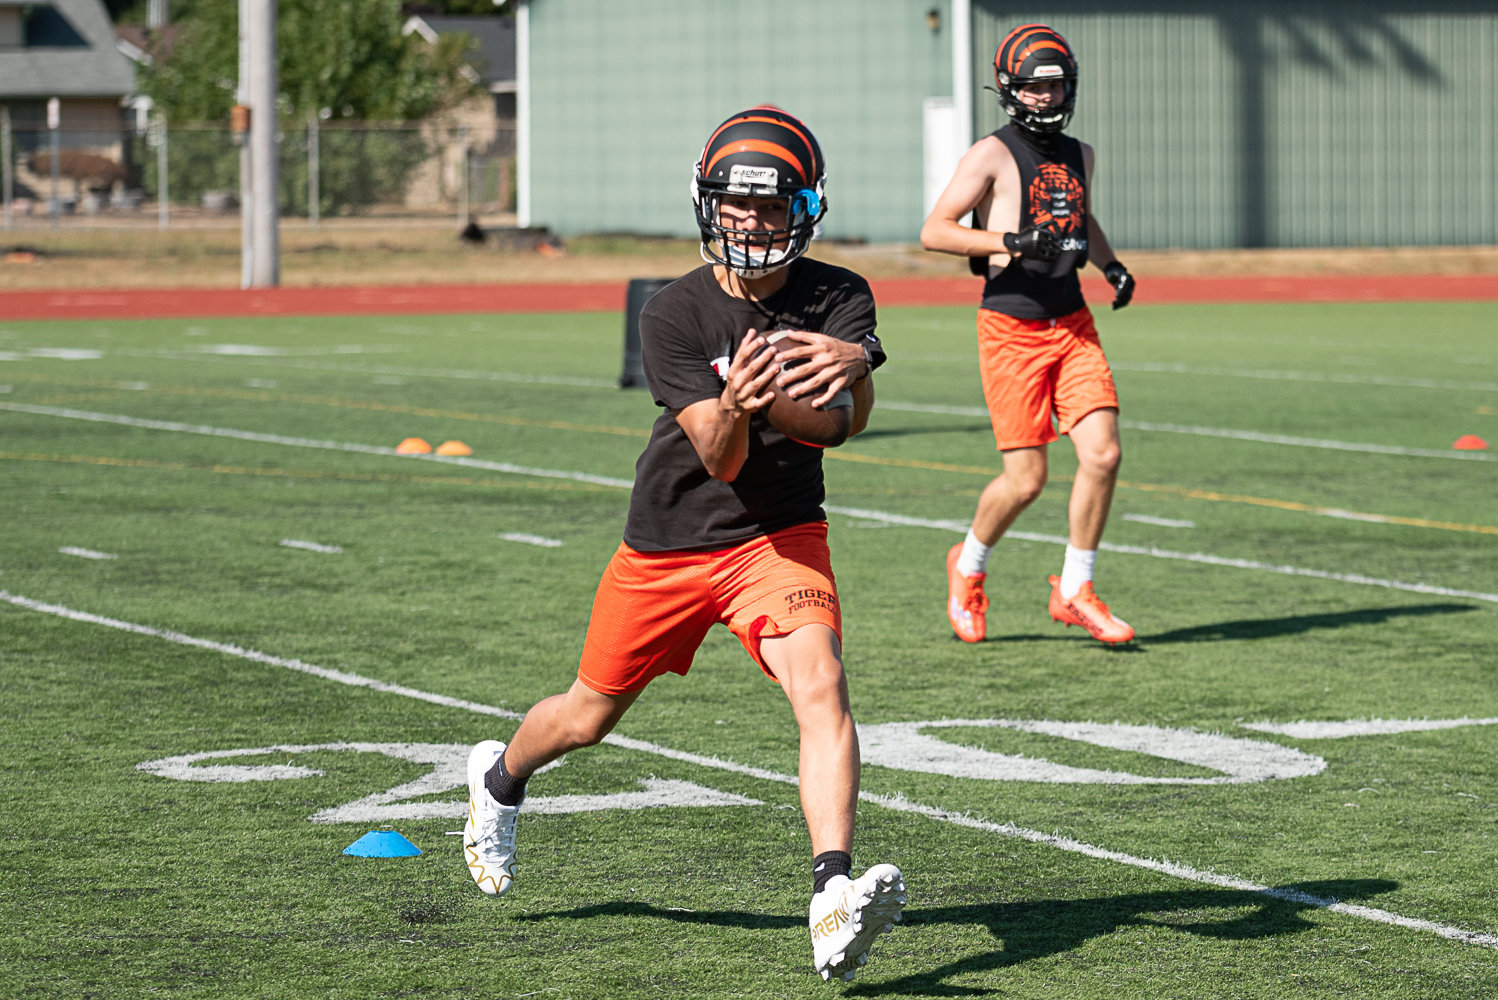 A Centralia player hauls in a pass during a drill during the first day of fall camp Aug. 17 at Tiger Stadium.